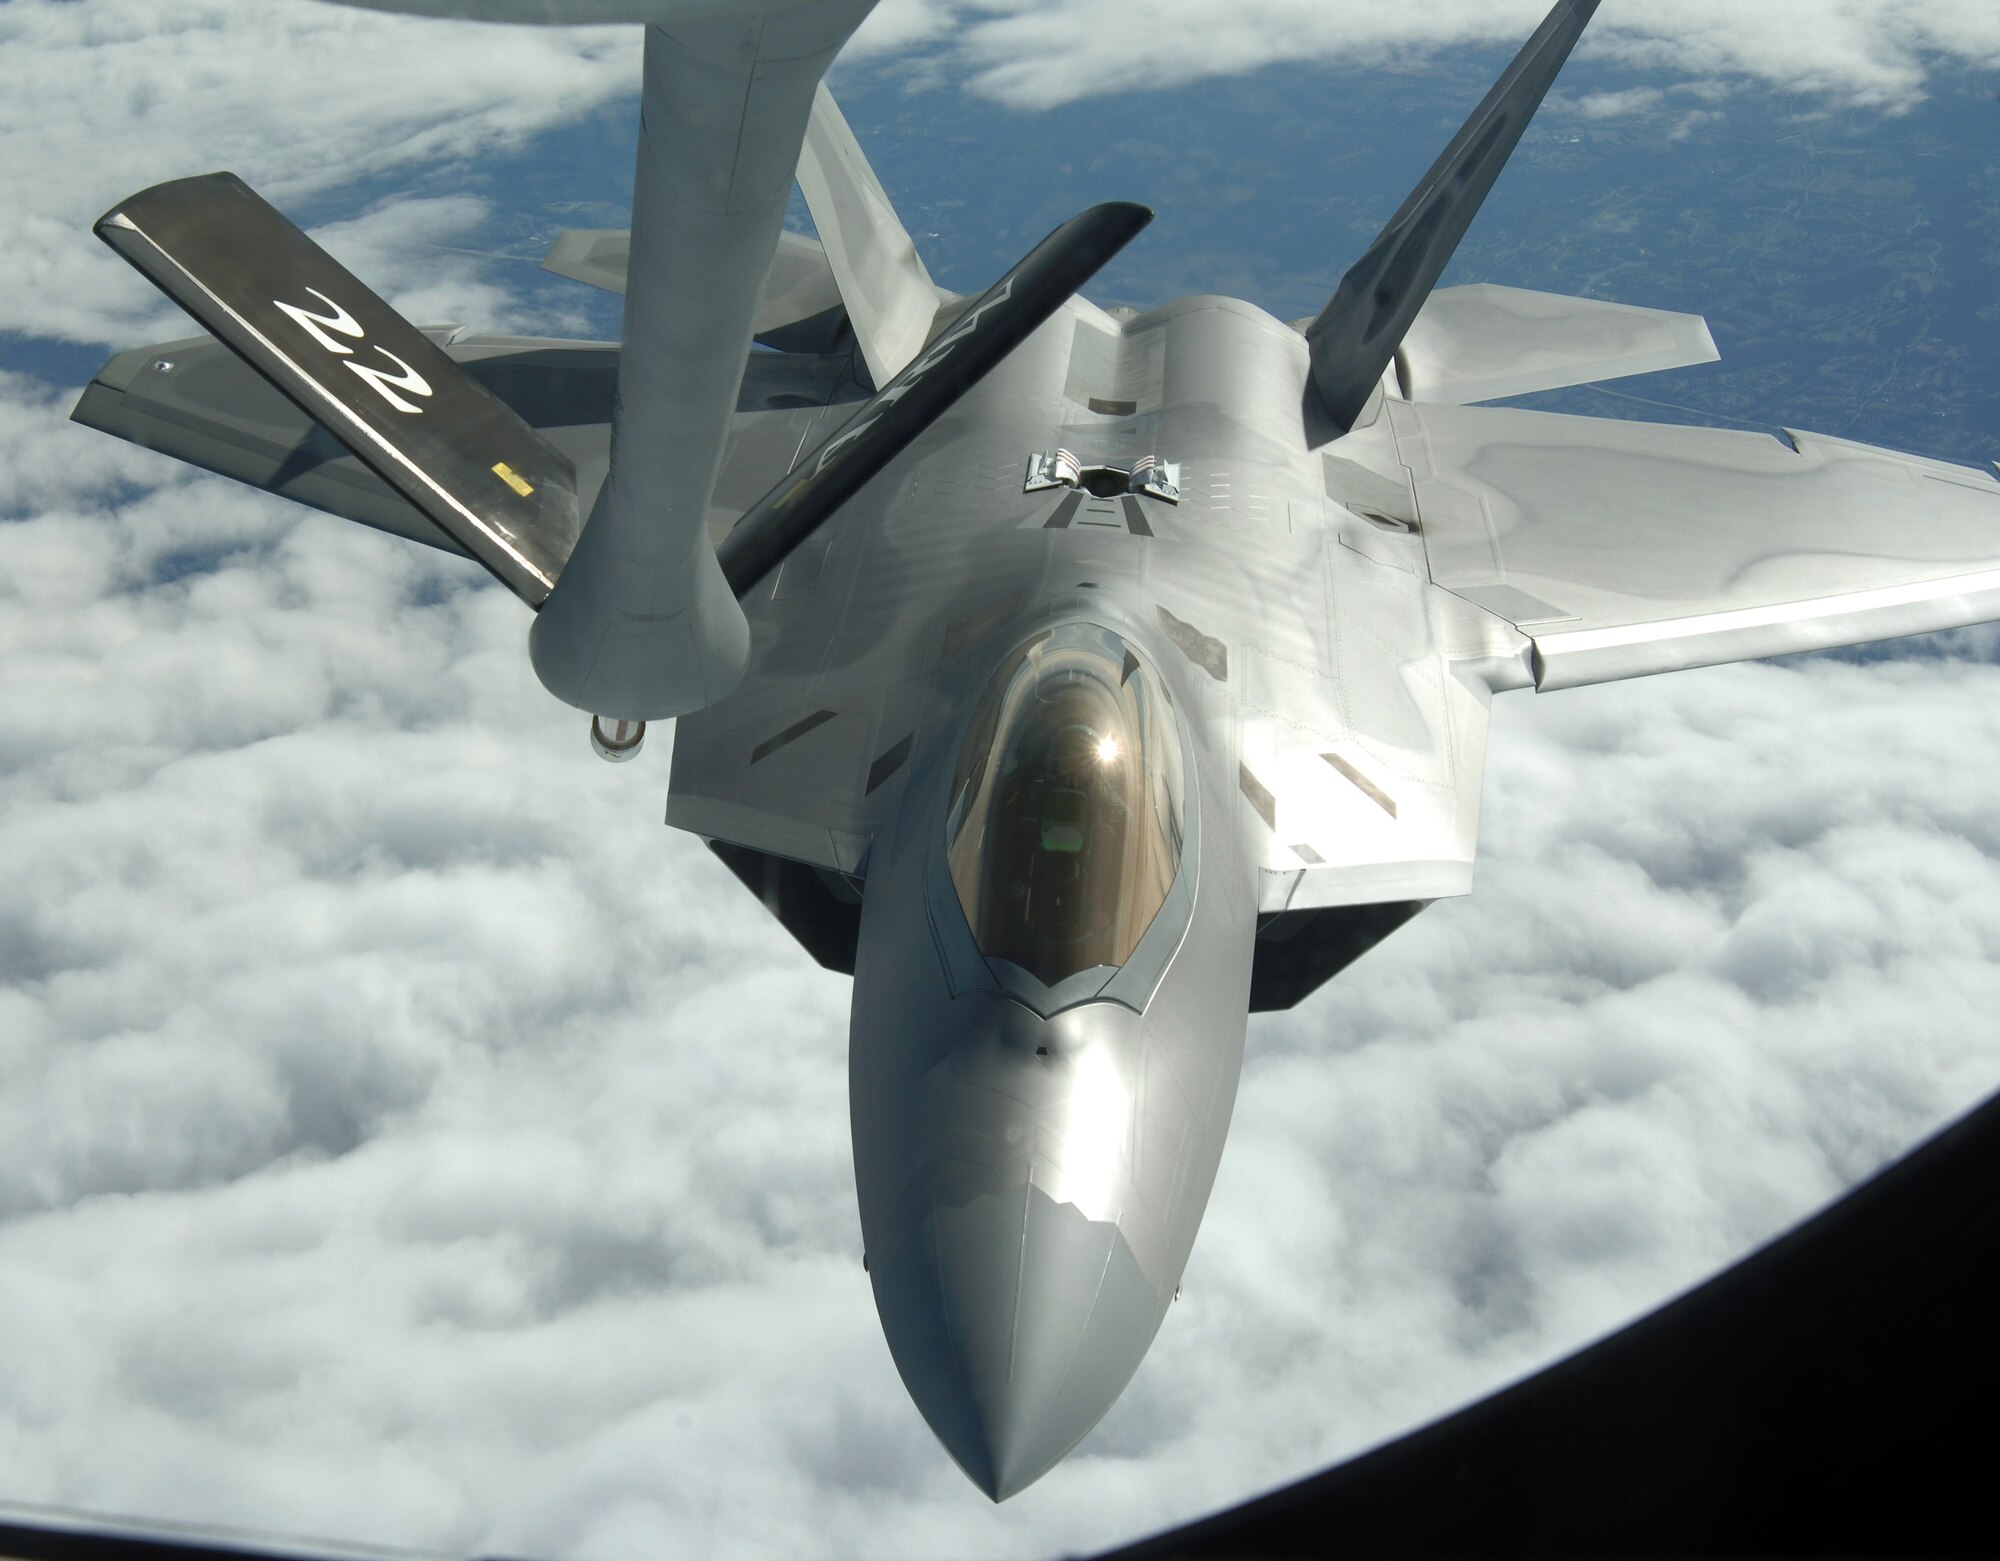 OVER THE UNITED STATES (AFPN) -- An F-22A Raptor from Langley Air Force Base, Va., refuels with a KC-135 Stratotanker from McConnell AFB, Kan., during the Raptor's first operational mission Jan. 21. The mission was flown in support of Operation Noble Eagle. The KC-135 was flown by the 18th Air Refueling Squadron. The F-22A was with the 27th Fighter Squadron. (U.S. Air Force photo by Master Sgt. Maurice Hessel)